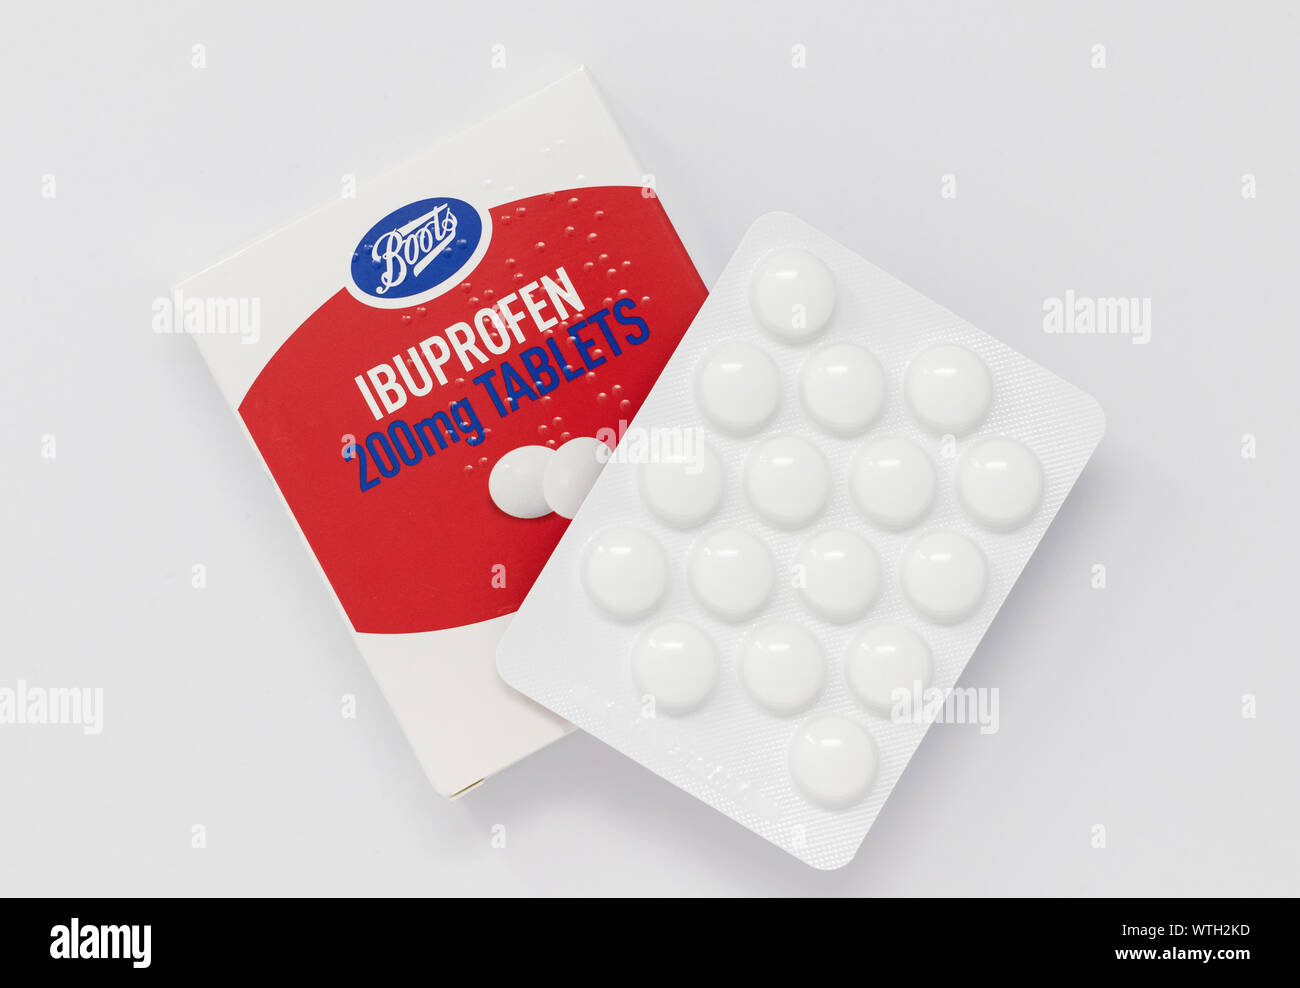 London / UK - September 7th 2019 - Packet of Ibuprofen painkillers, closeup with blister pack of tablets from Boots pharmacy Stock Photo